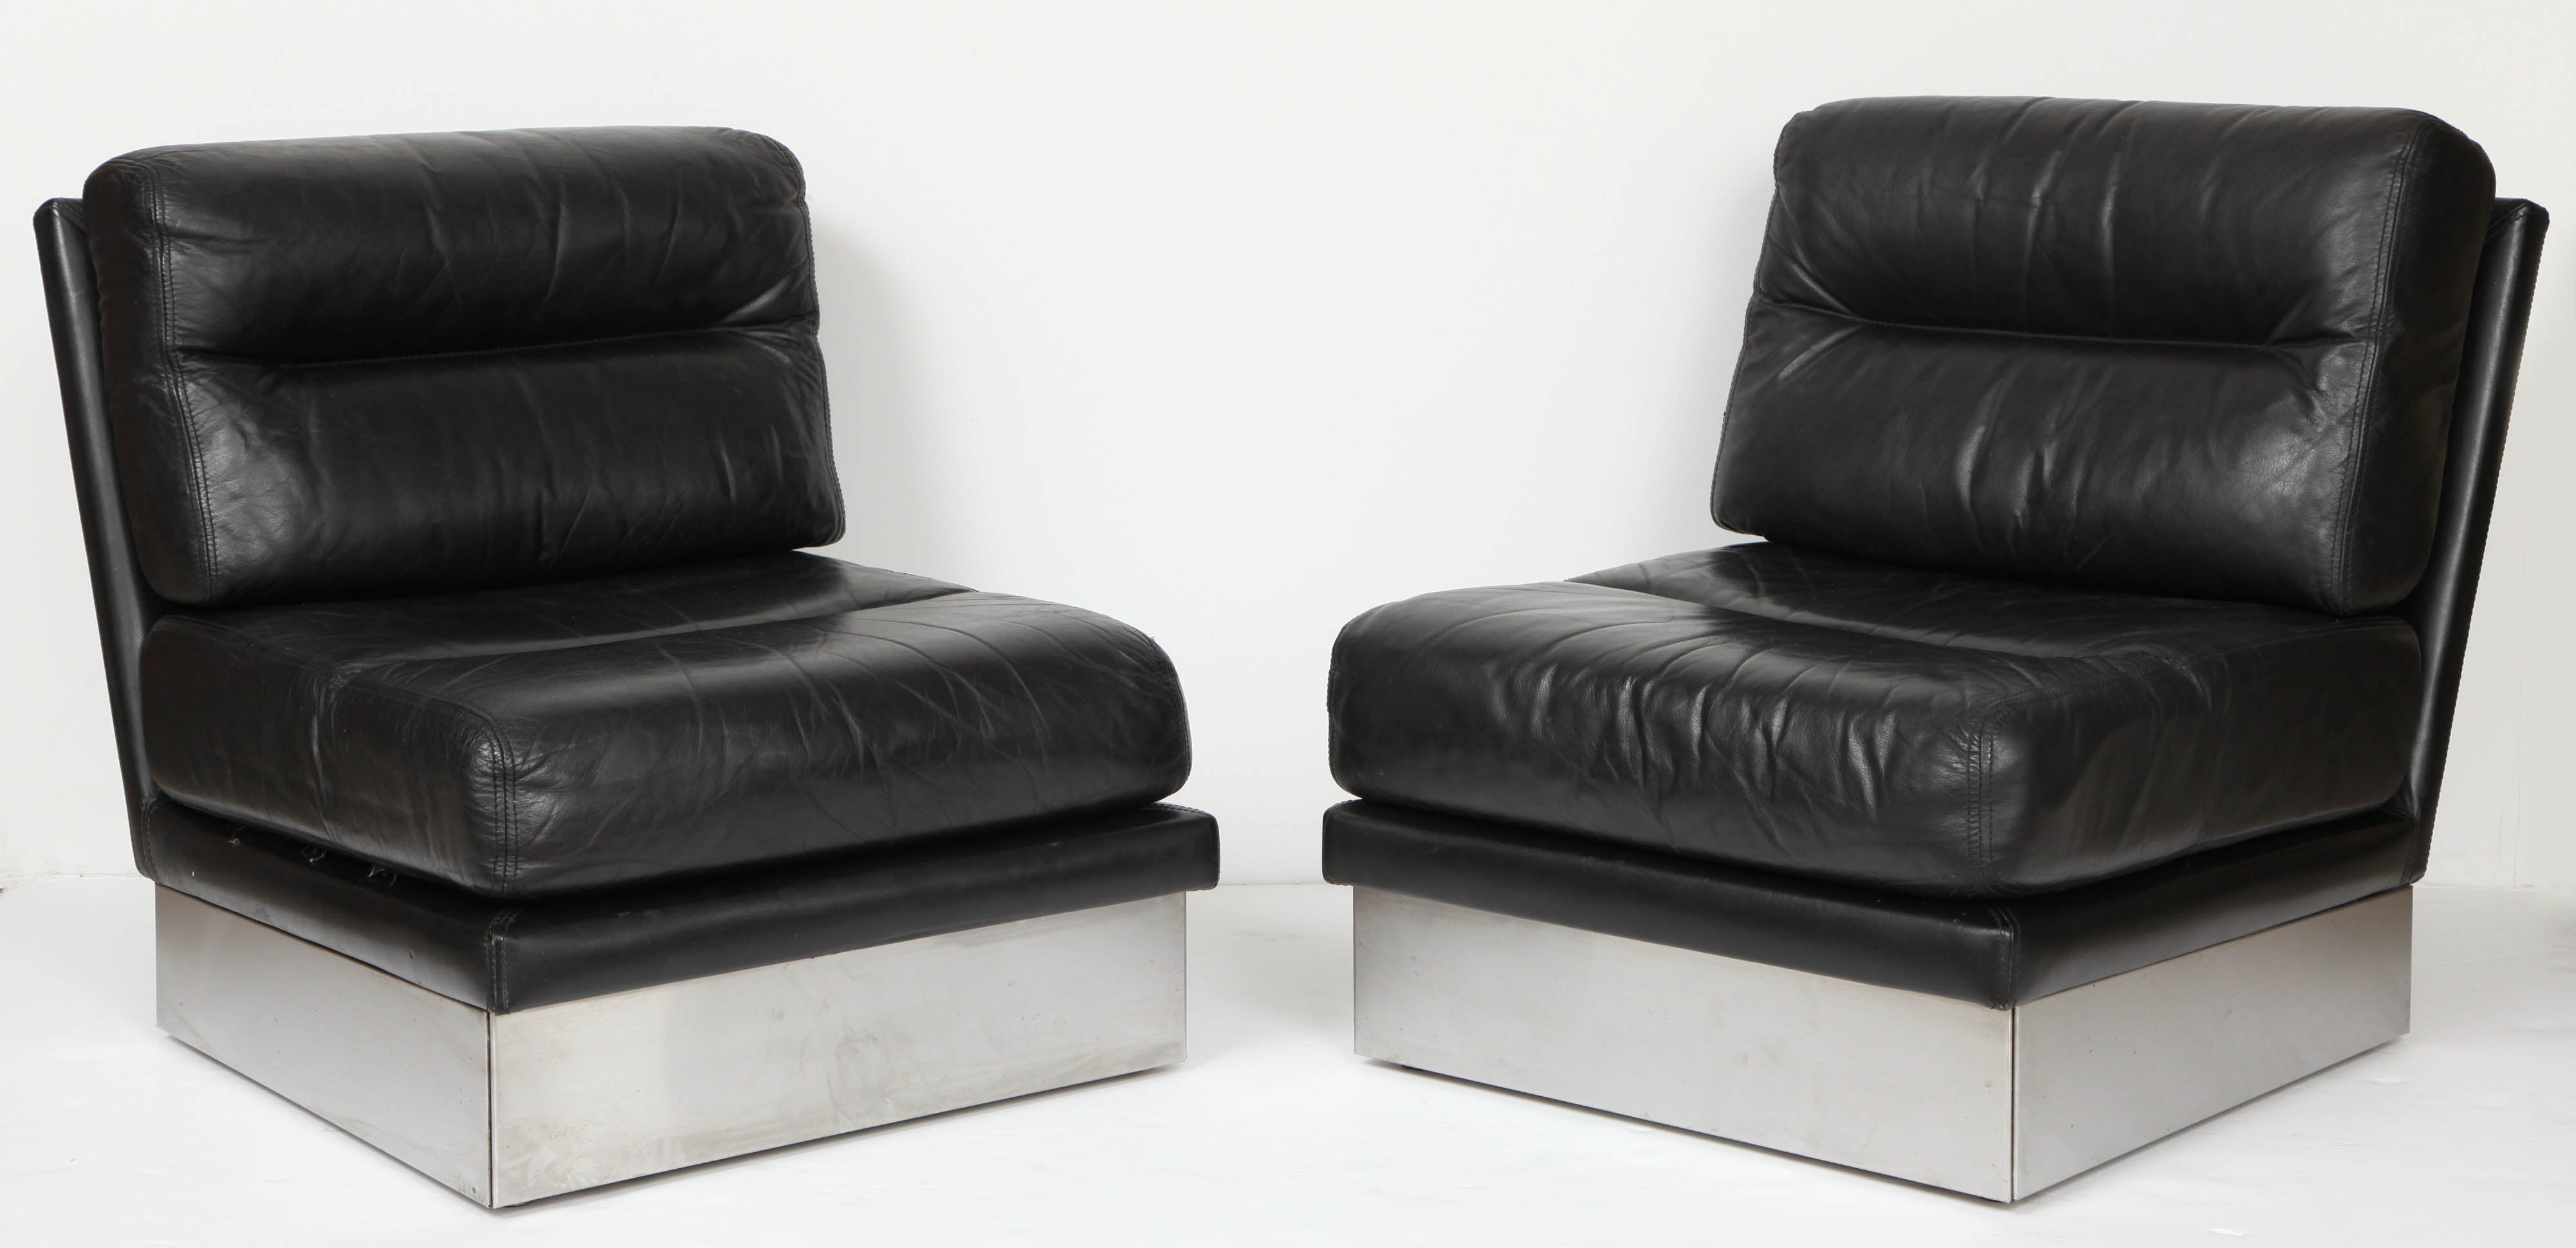 Pair of Leather and Stainless Steel Chairs by Roche Bobois, France, 1970s